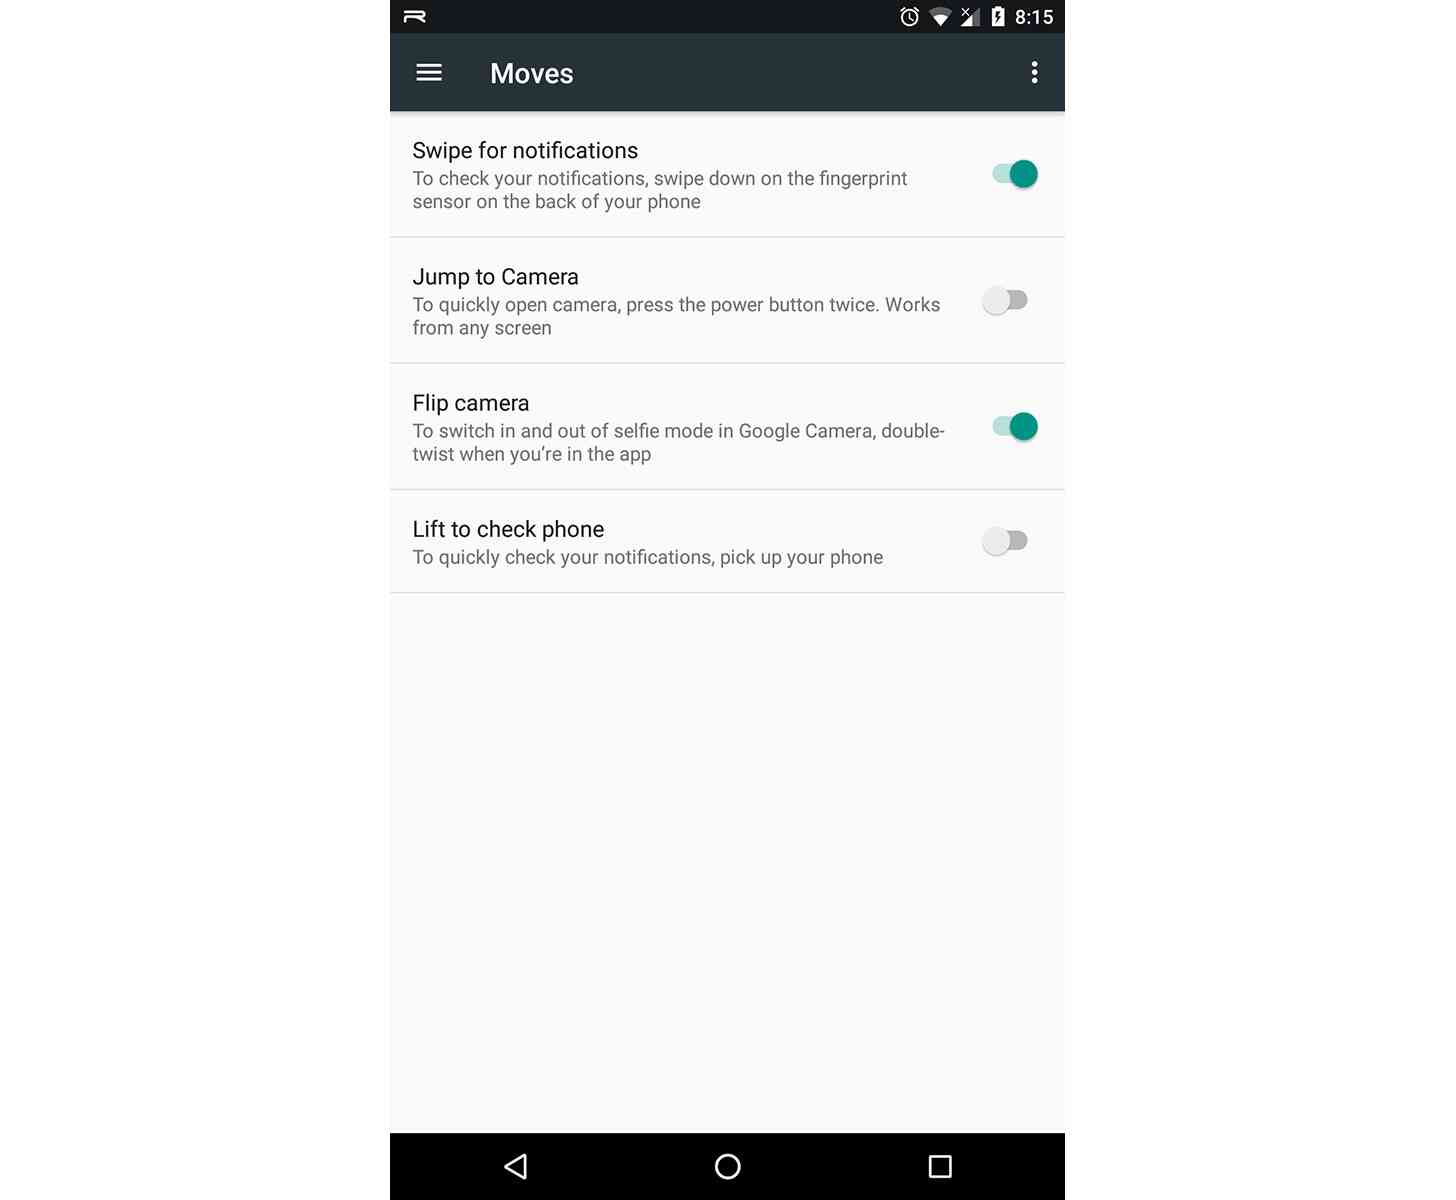 Nexus 5X Android 7.1.2 Swipe for notifications